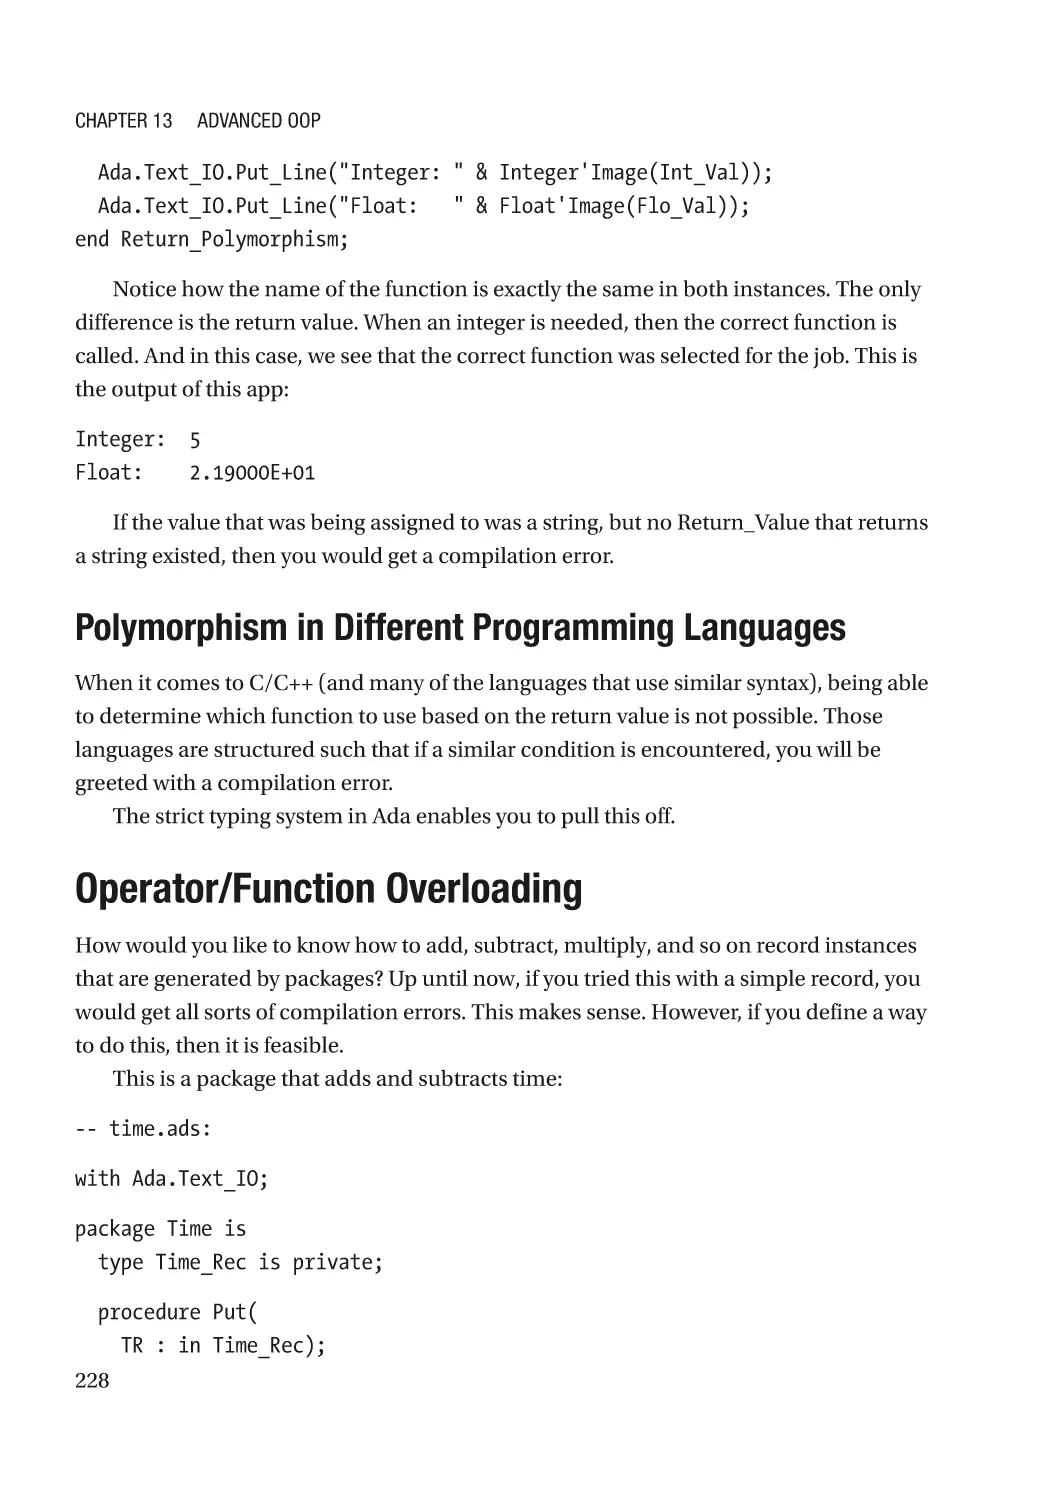 Polymorphism in Different Programming Languages
Operator/Function Overloading